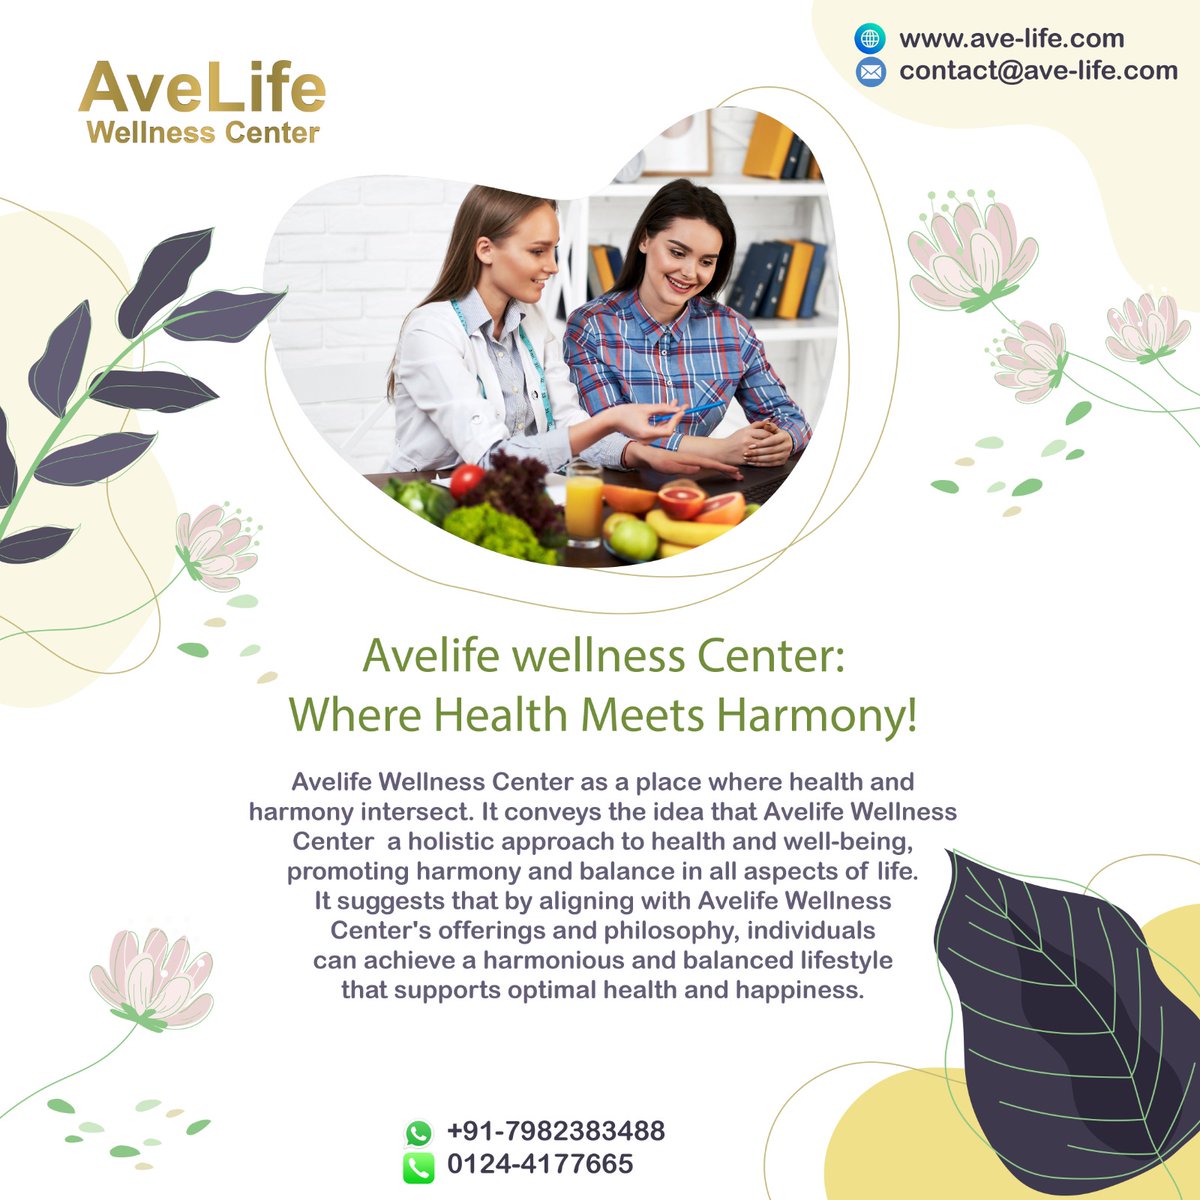 'Dive into a world of wellness with AveLife! Personalized diet plans and expert guidance await you🍽️ #wellnessgoals 
#nutritioninvestment #avelifewellness
#avelifewellnesscenter
#dietcounselling
#supportivecare
#healthiertogether
#oncologist
#radiotherapy
#chemotherapy
#Everyone